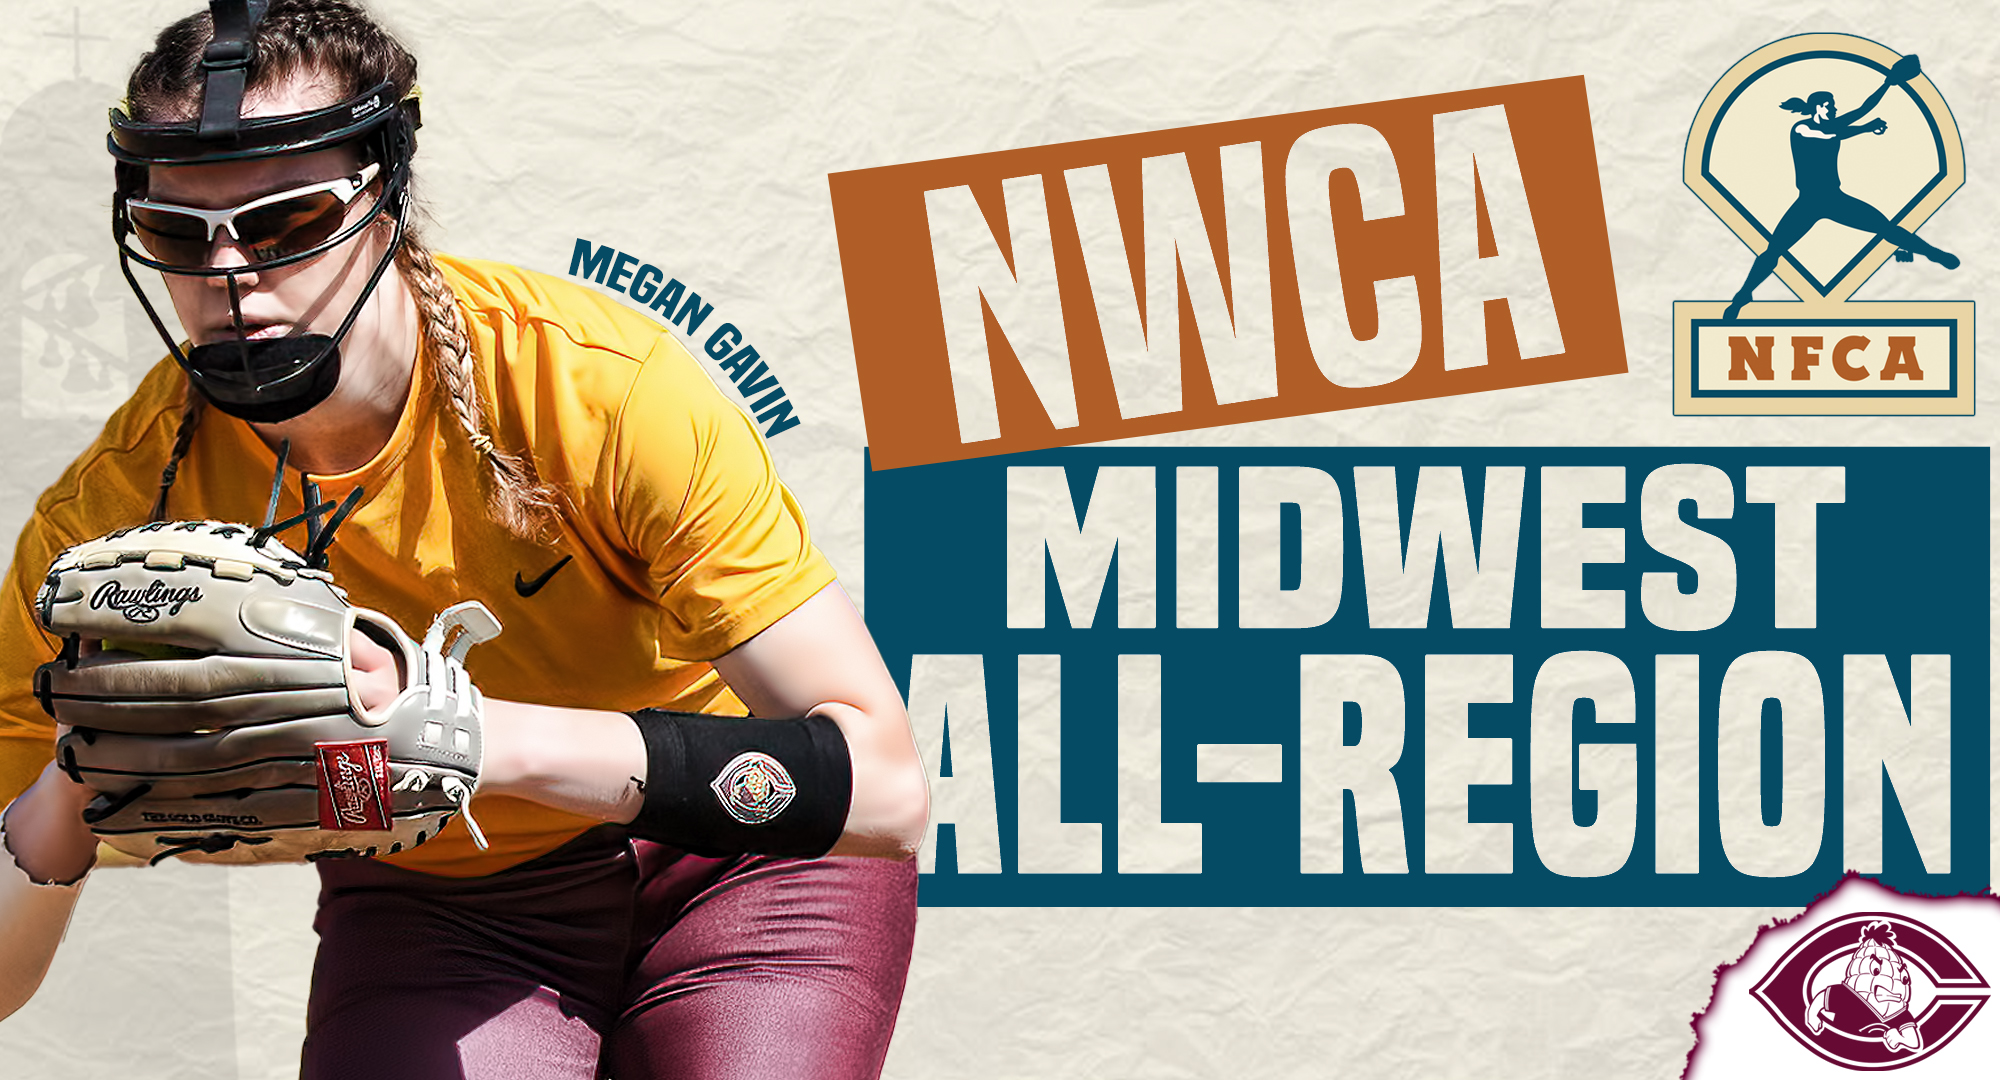 Megan Gavin was named to the NFCA Midwest All-Region Second Team. She becomes the first Cobber player to earn All-Region honors since 2002. 